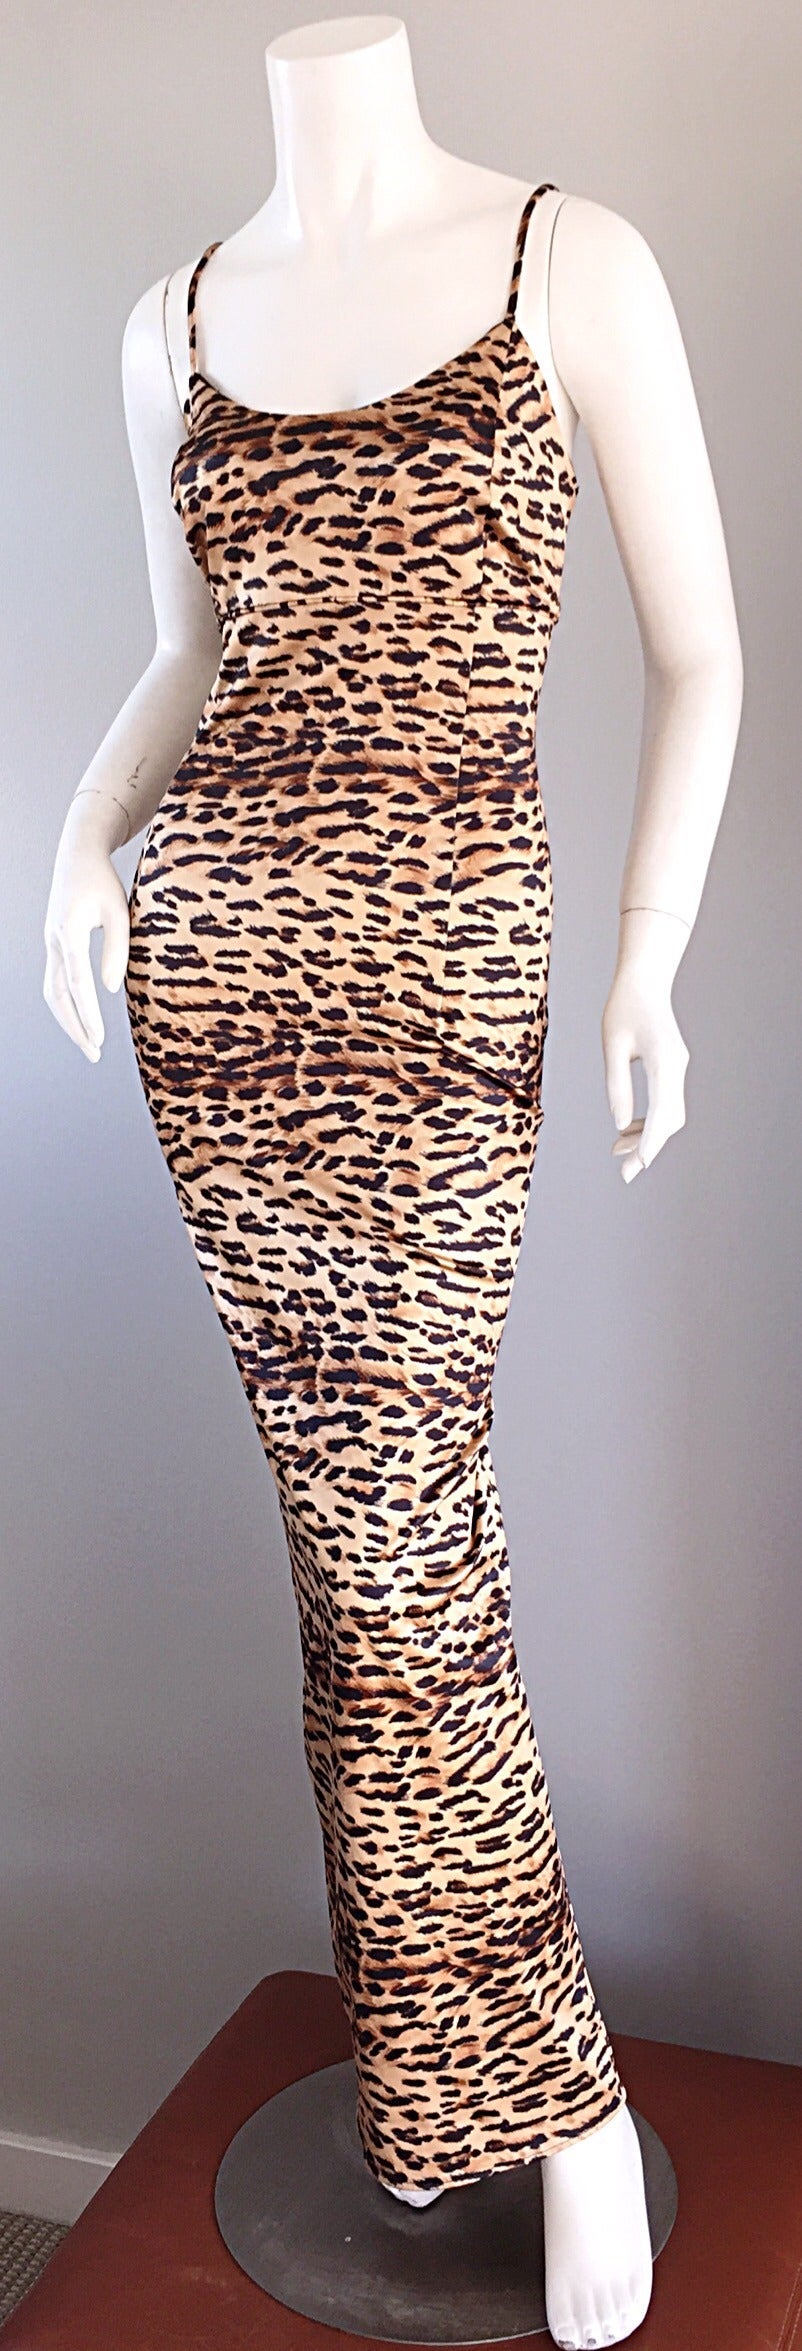 Iconic and Rare 1990s Dolce & Gabbana Leopard Print Vintage Bodycon Dress 1